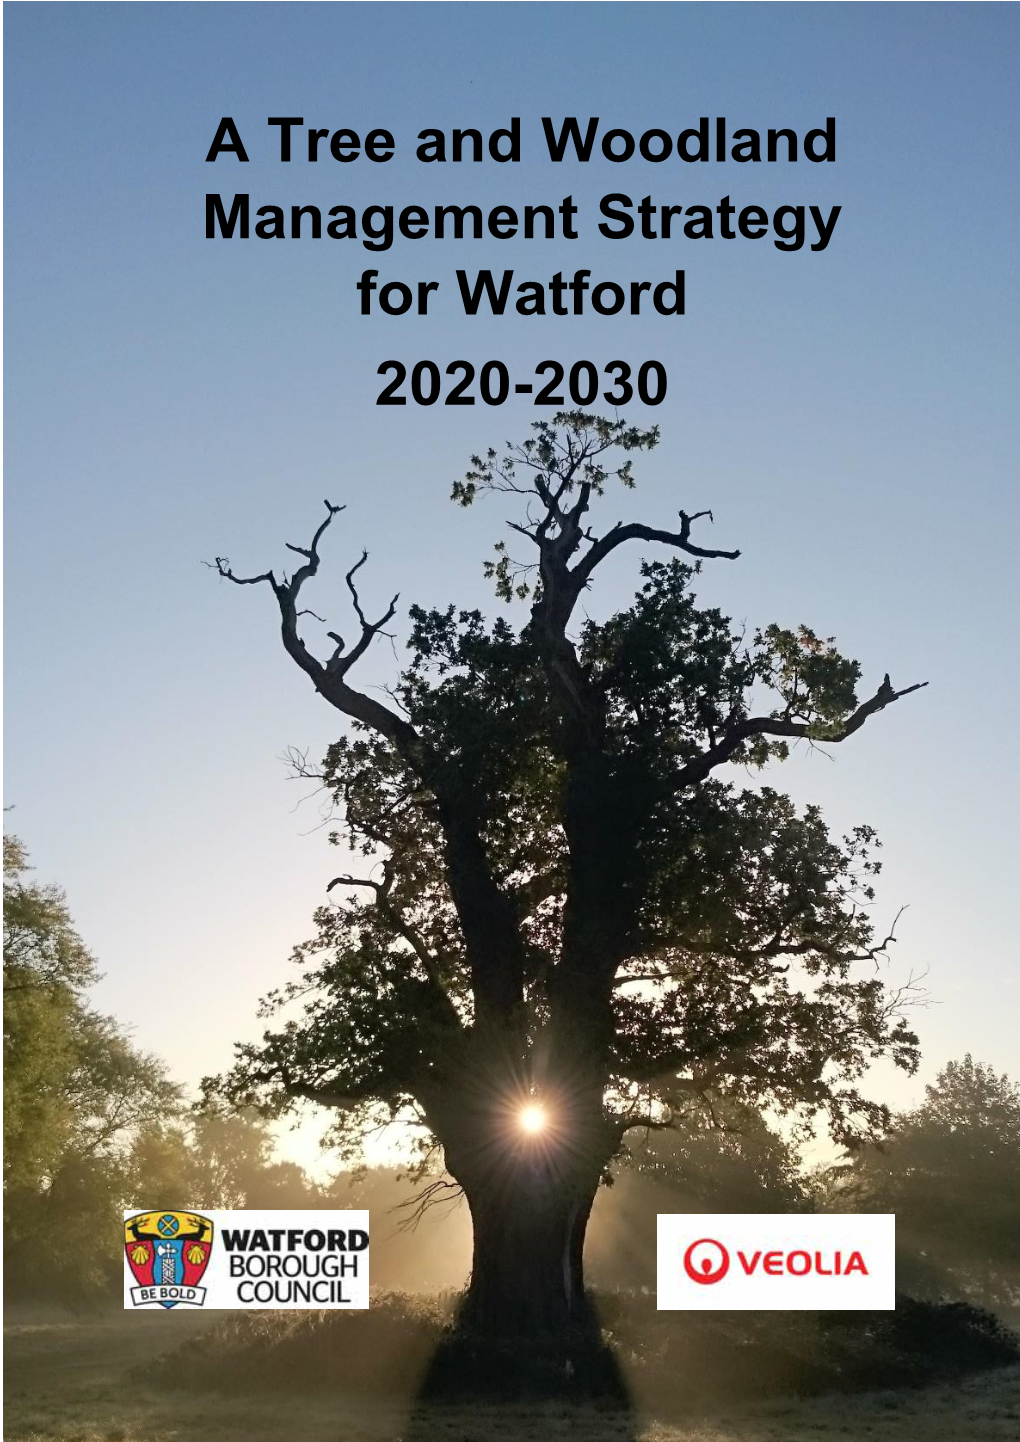 A Tree and Woodland Management Strategy for Watford 2020-2030